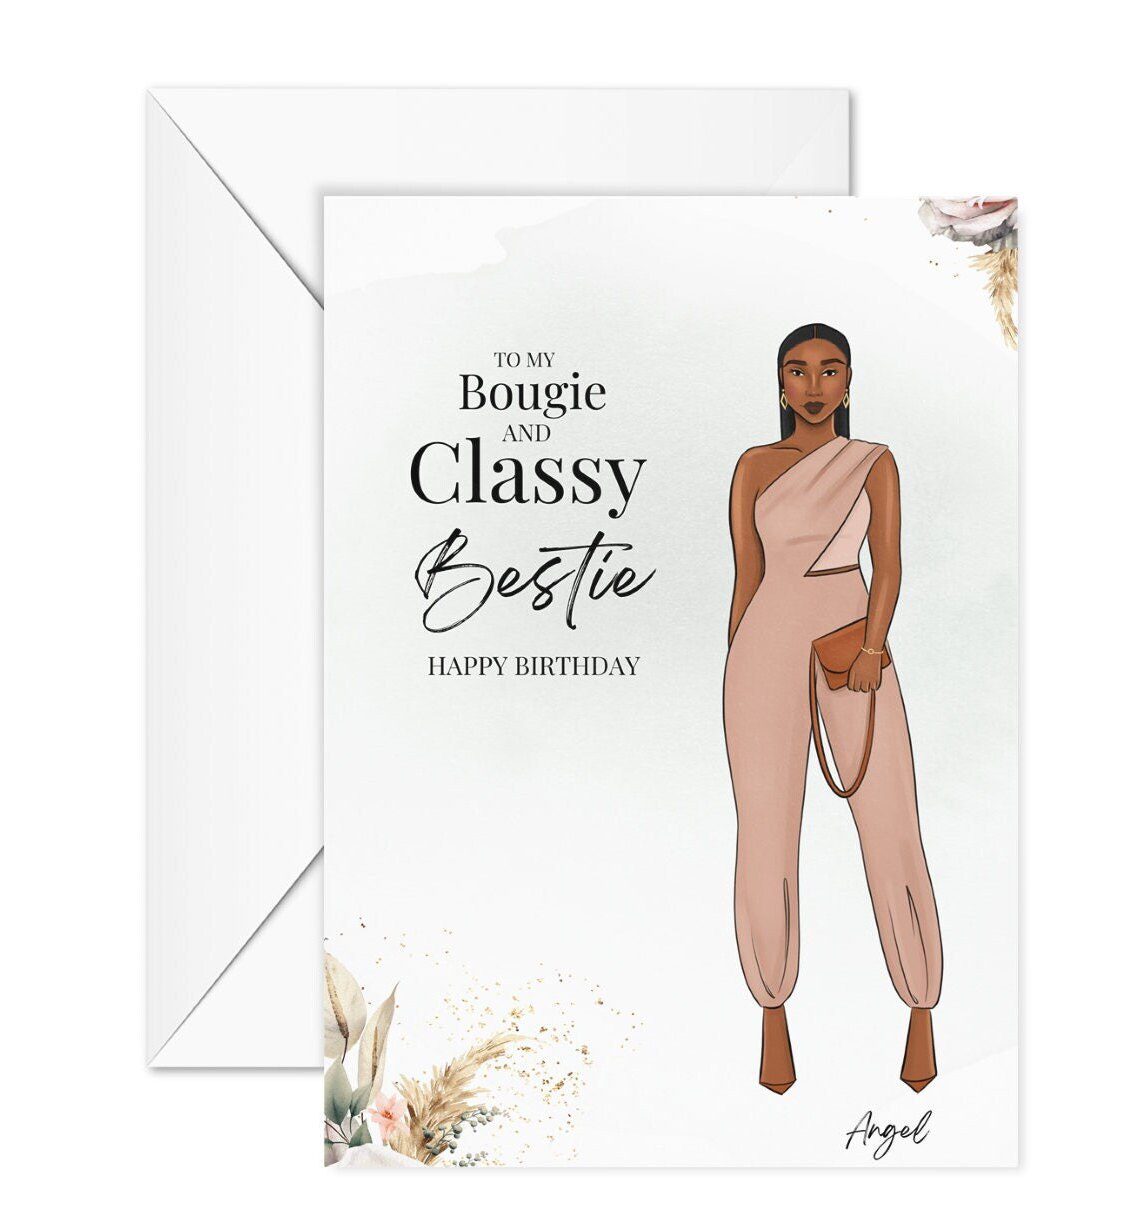 Bougie and Classy Bestie Birthday Card for Her